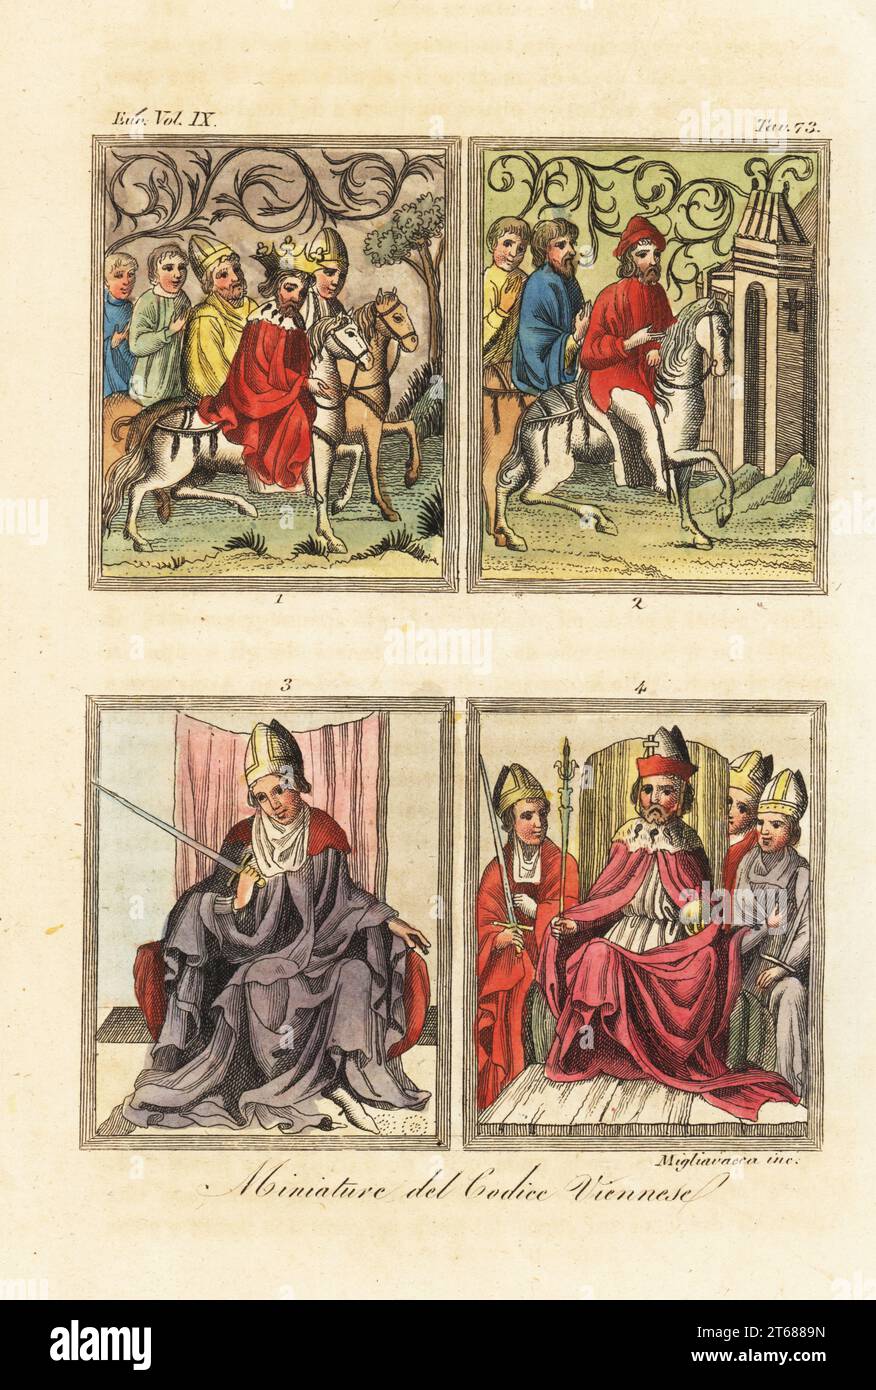 King Wenceslaus of Bohemia riding with the Archbishop of Mainz, the Bishops of Bamberg and Wurtzburg and the Burgraves of Nuremberg 1; citizens of Frankfurt on horseback 2; the Archbishop of Mainz 3, and Holy Roman Emperor Charles IV on his throne with sceptre and orb with the Archbishops of Trier, Cologne and Mainz 4. Miniatures from the Vienna Codex of the Golden Bull, an illuminated manuscript prepared for King Wenceslaus IV of Bohemia, 1365. Handcoloured copperplate engraving by Migliavacca from Giulio Ferrarios Costumes Ancient and Modern of the Peoples of the World, Il Costume Antico e M Stock Photo